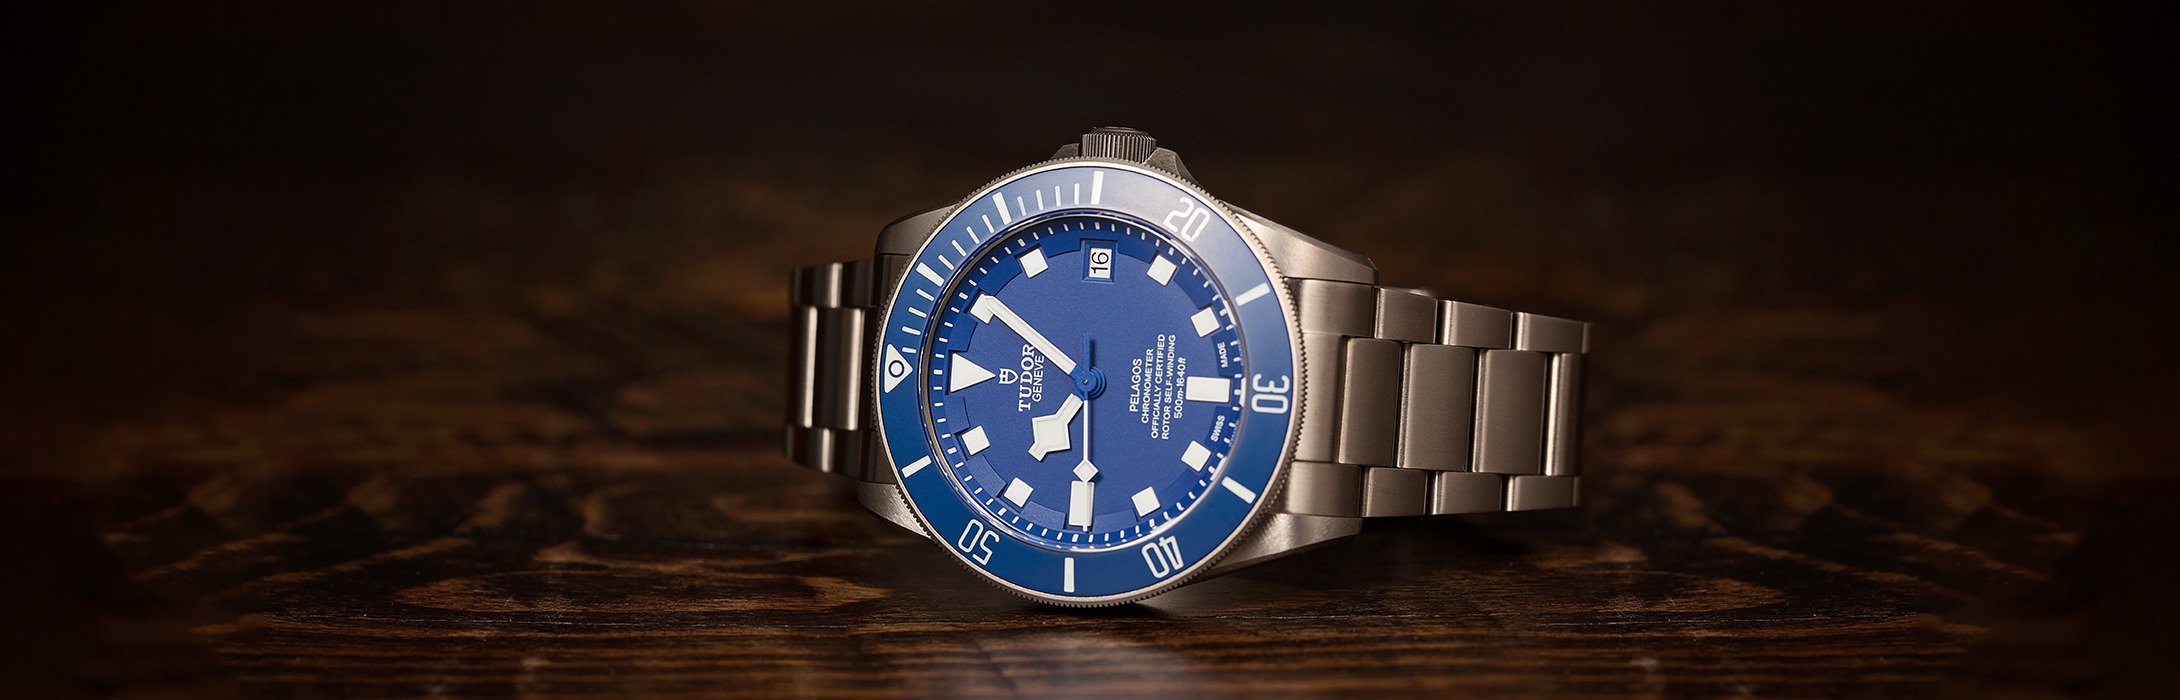 Tudor Dive Watch Ultimate Buying Guide